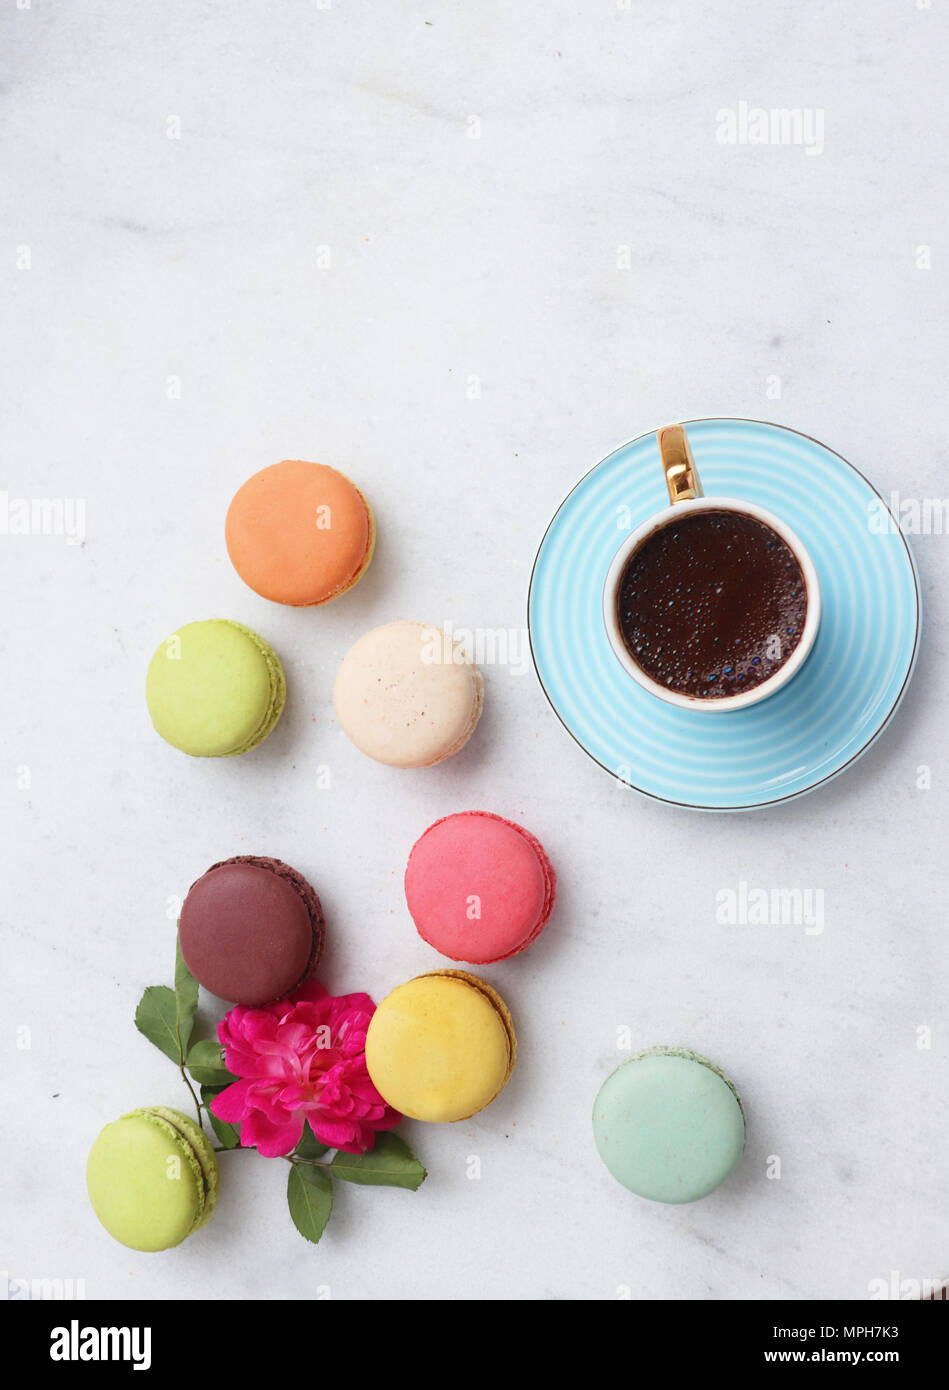 colorful macarons on white background Stock Photo